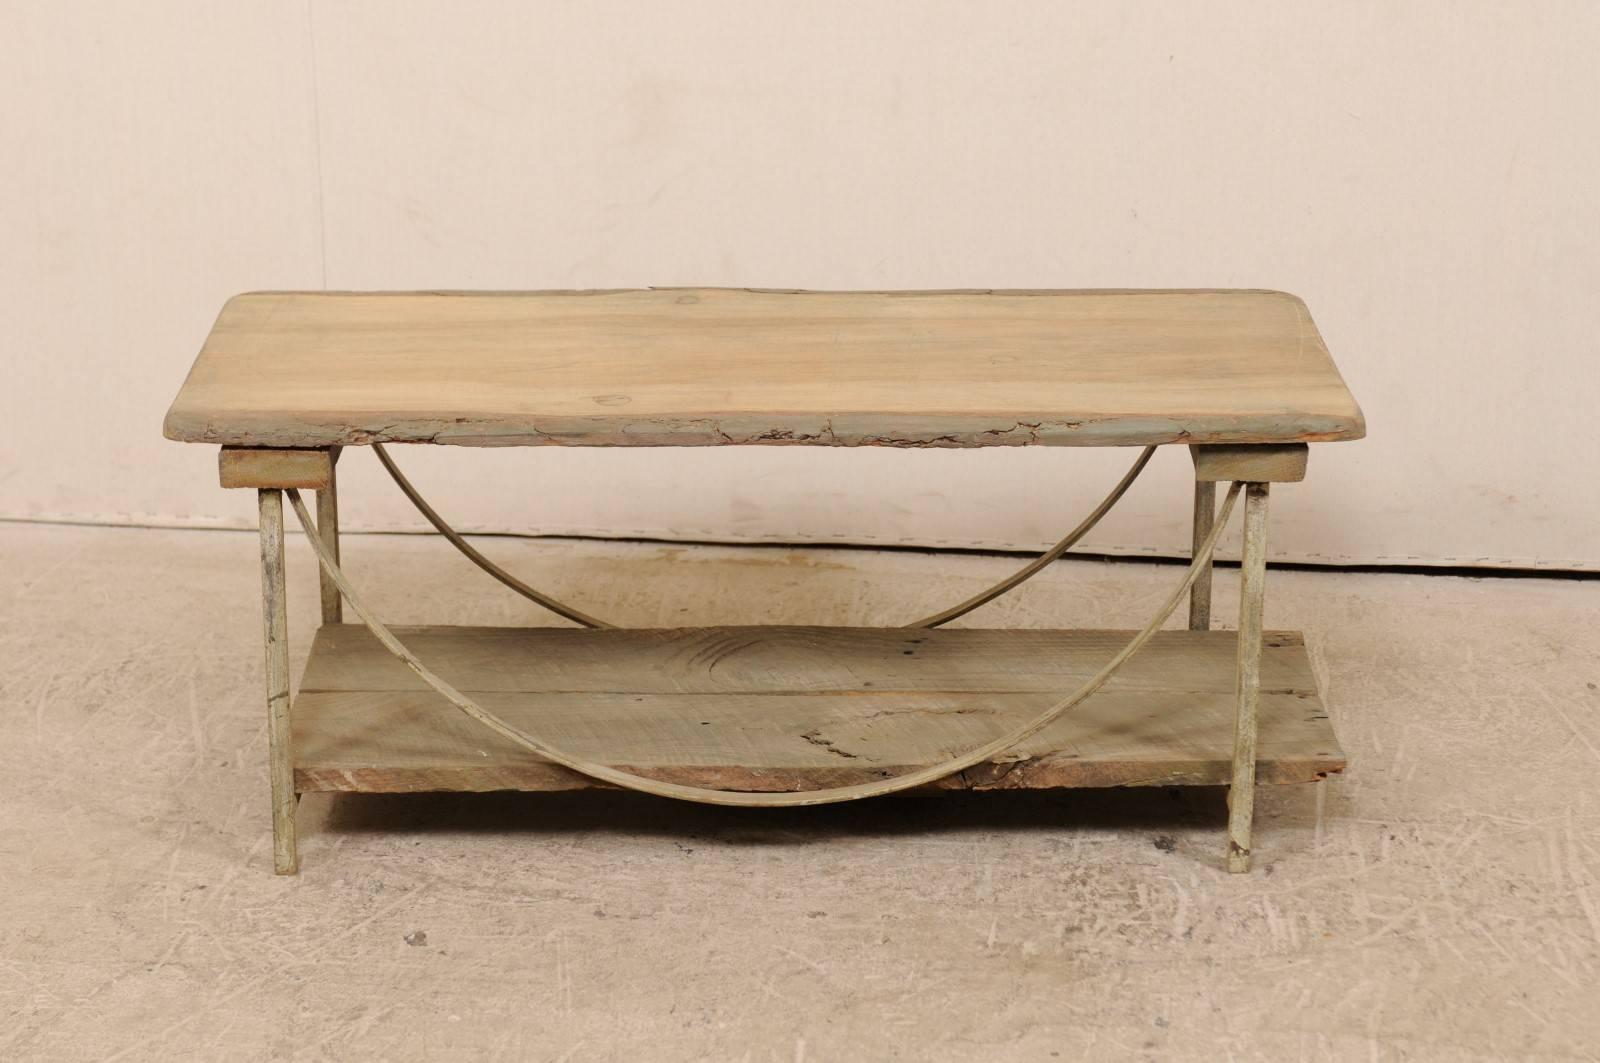 American Vintage Sycamore Wood and Painted Iron Rustic Coffee Table in Beige Neutrals